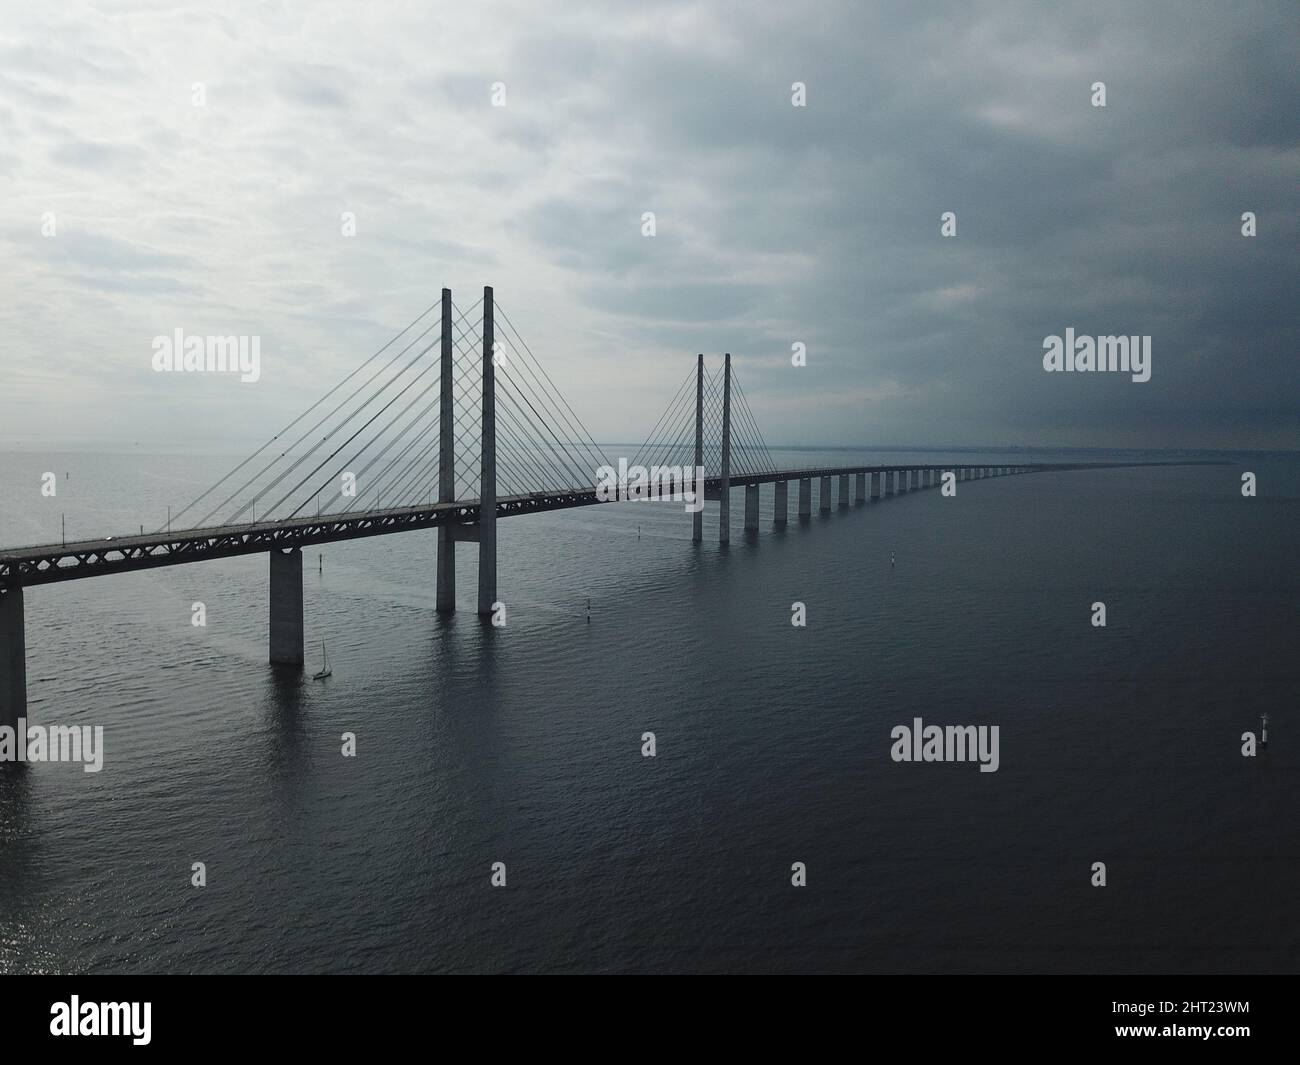 Aerial view of the bridge across the Oresund strait between Denmark and Sweden on a cloudy day Stock Photo